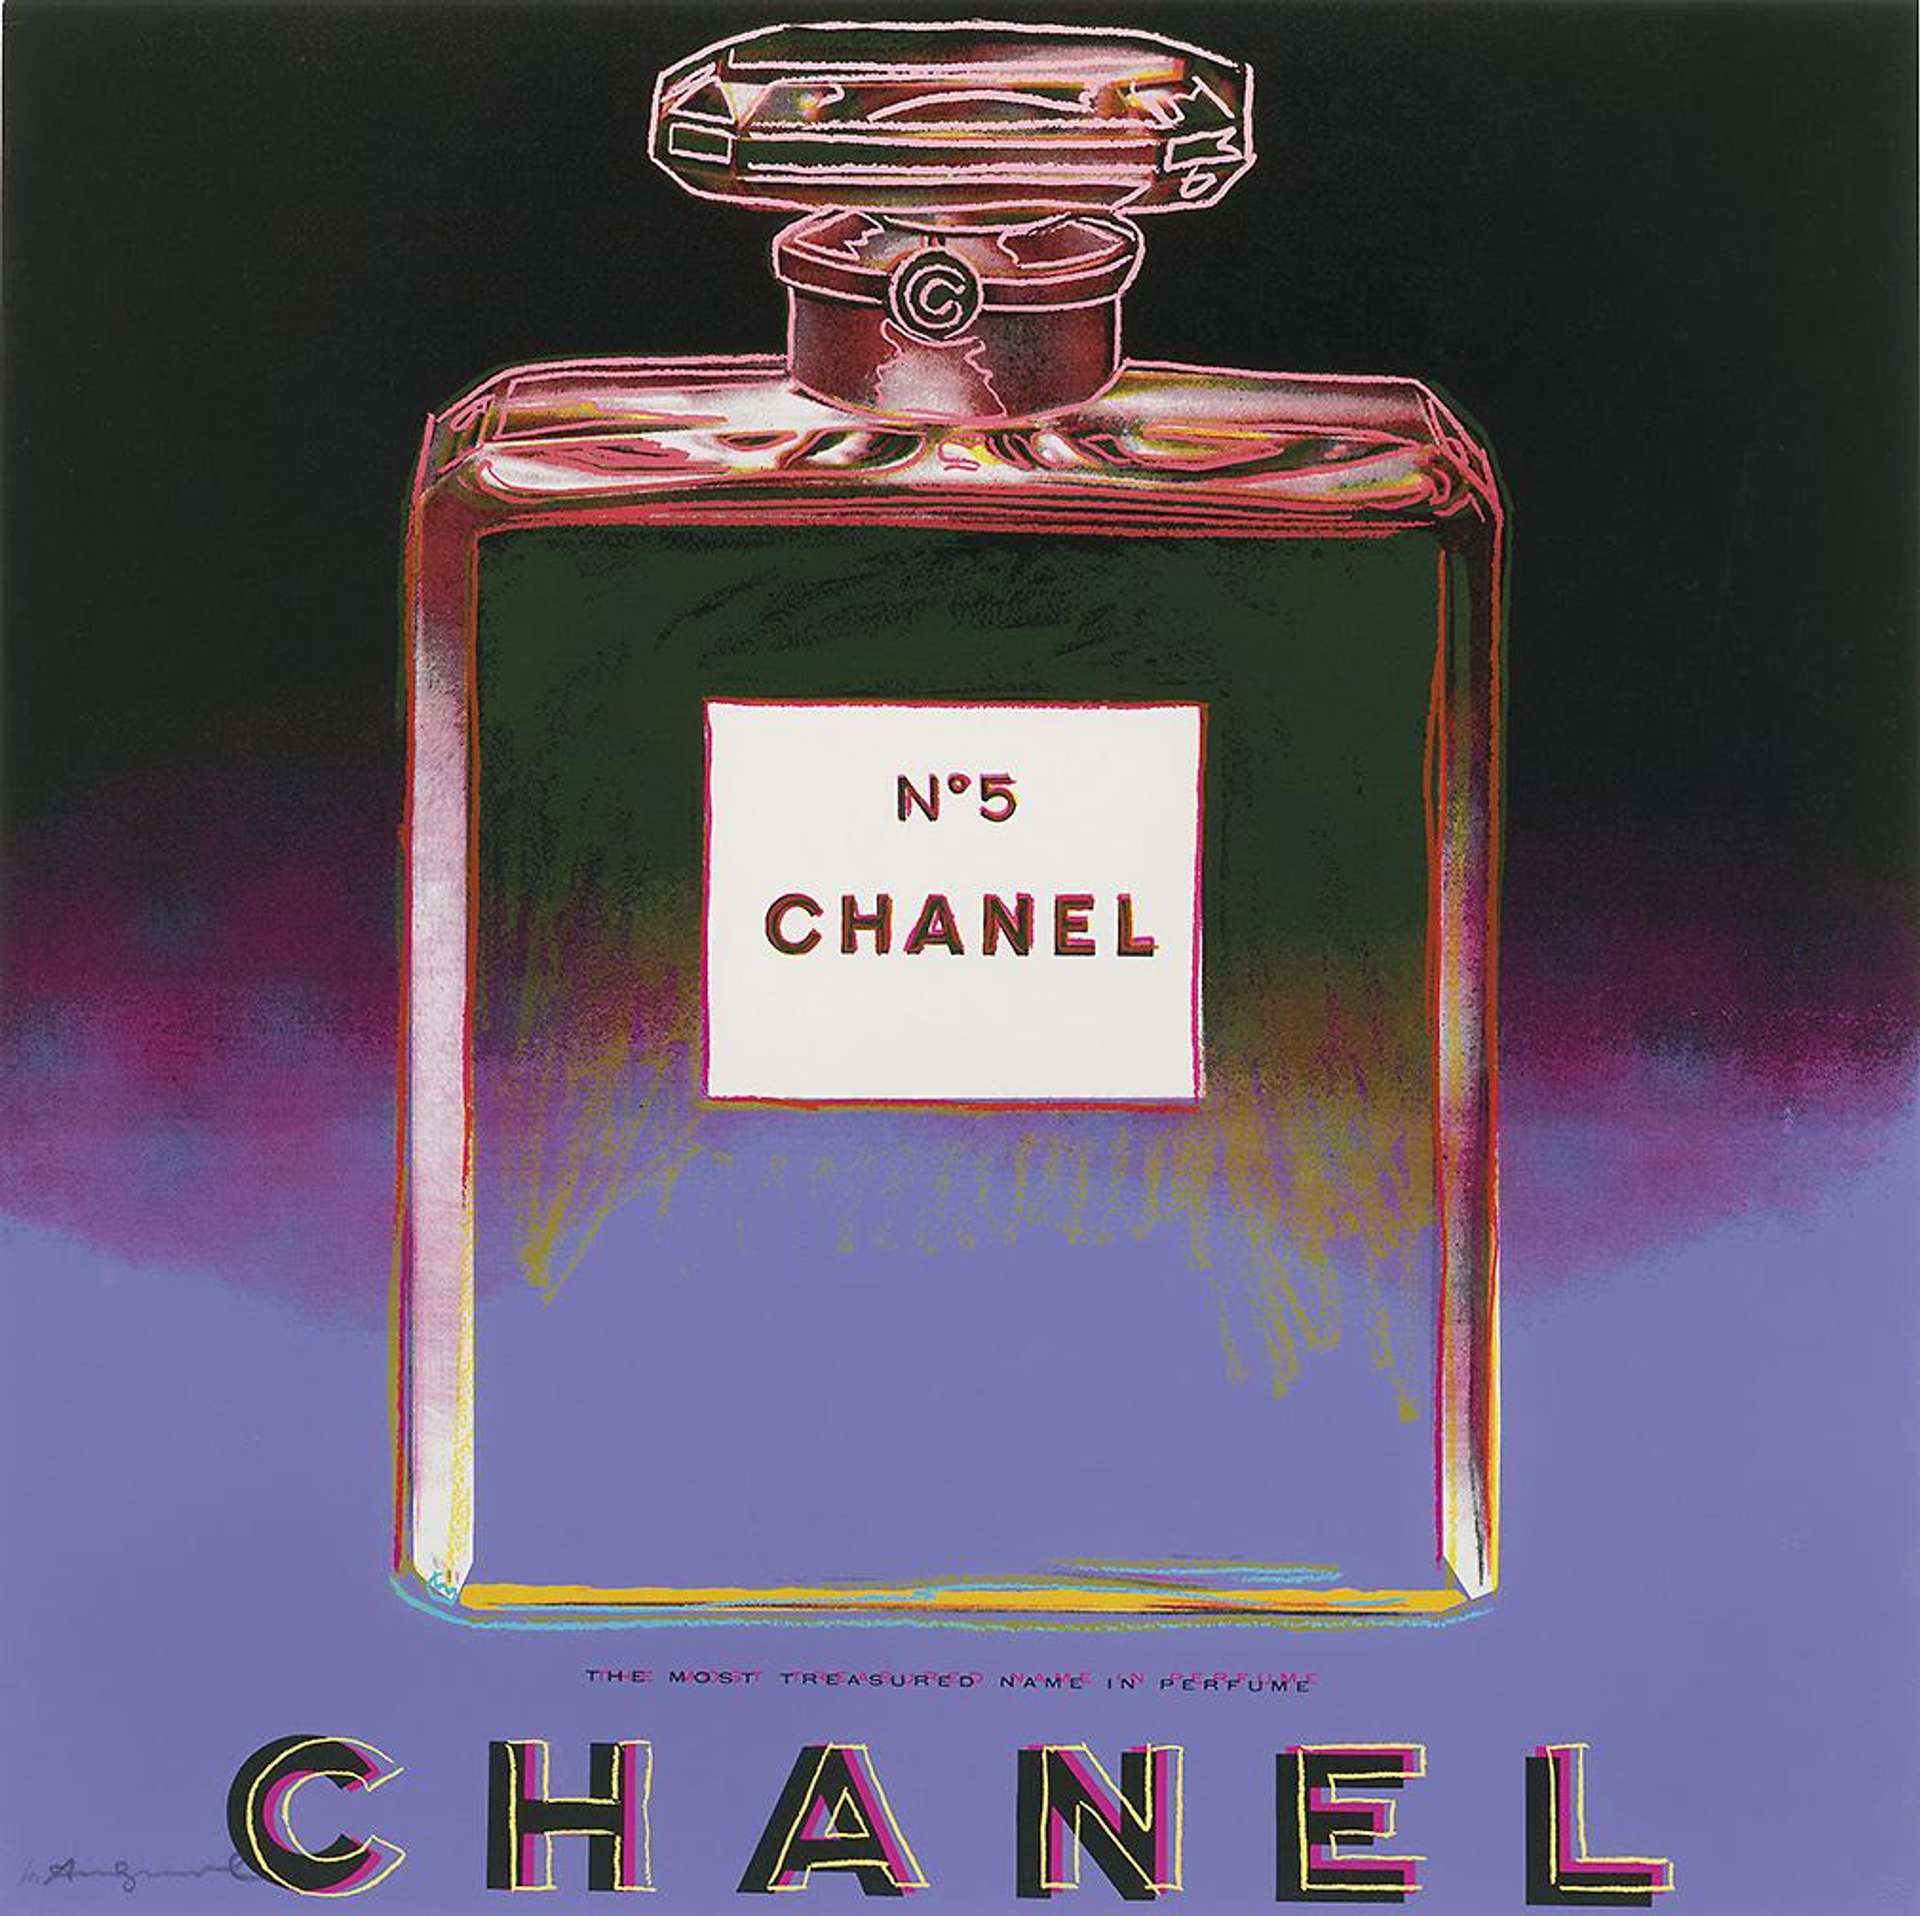 A Pop Art print by Andy Warhol depicting and advert image of a Chanel No. 5 bottle in purple and pink.